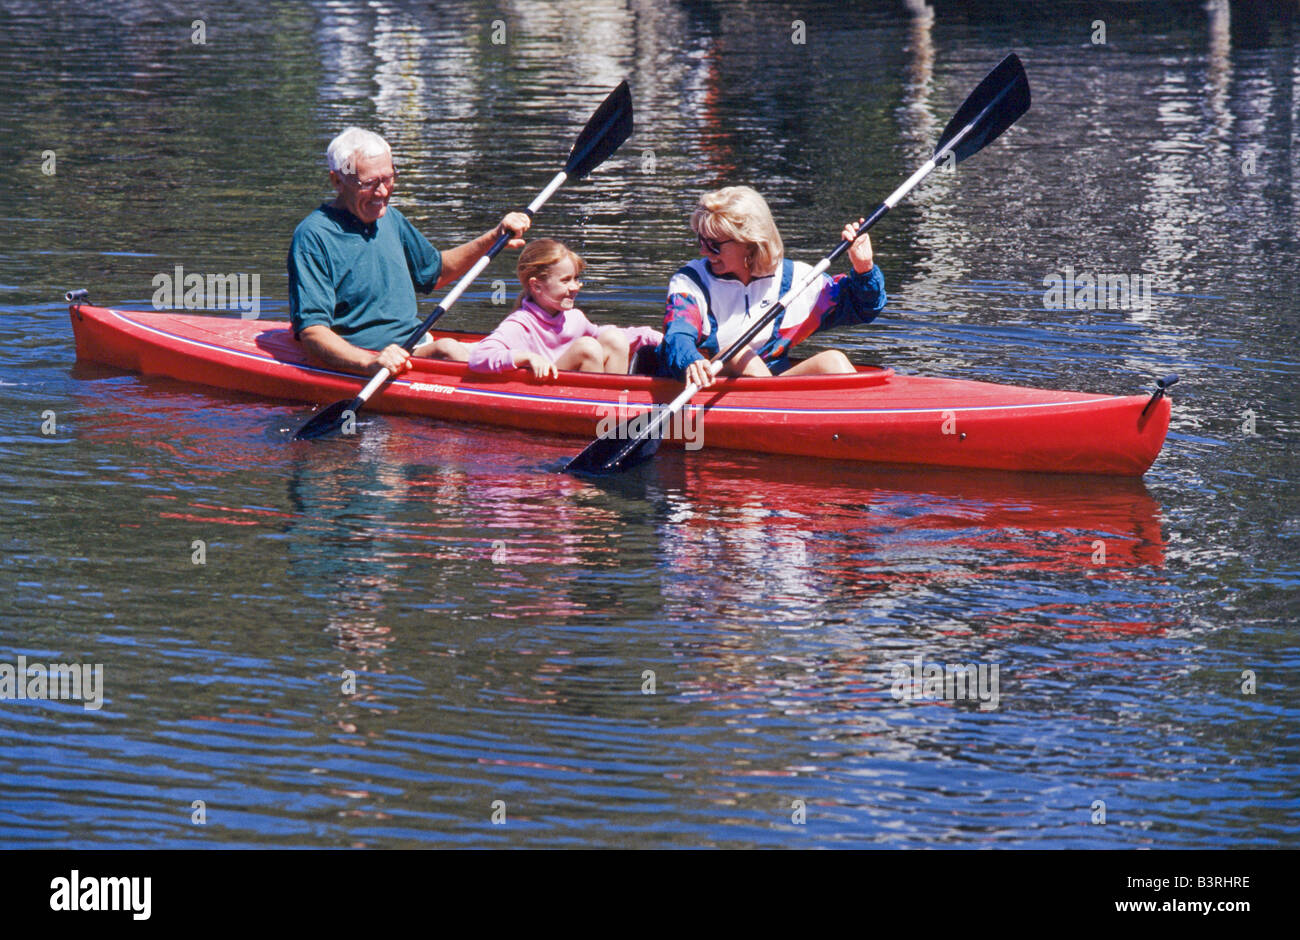 Grandmother and grandkids, kayaking together in park, Miami. Stock Photo